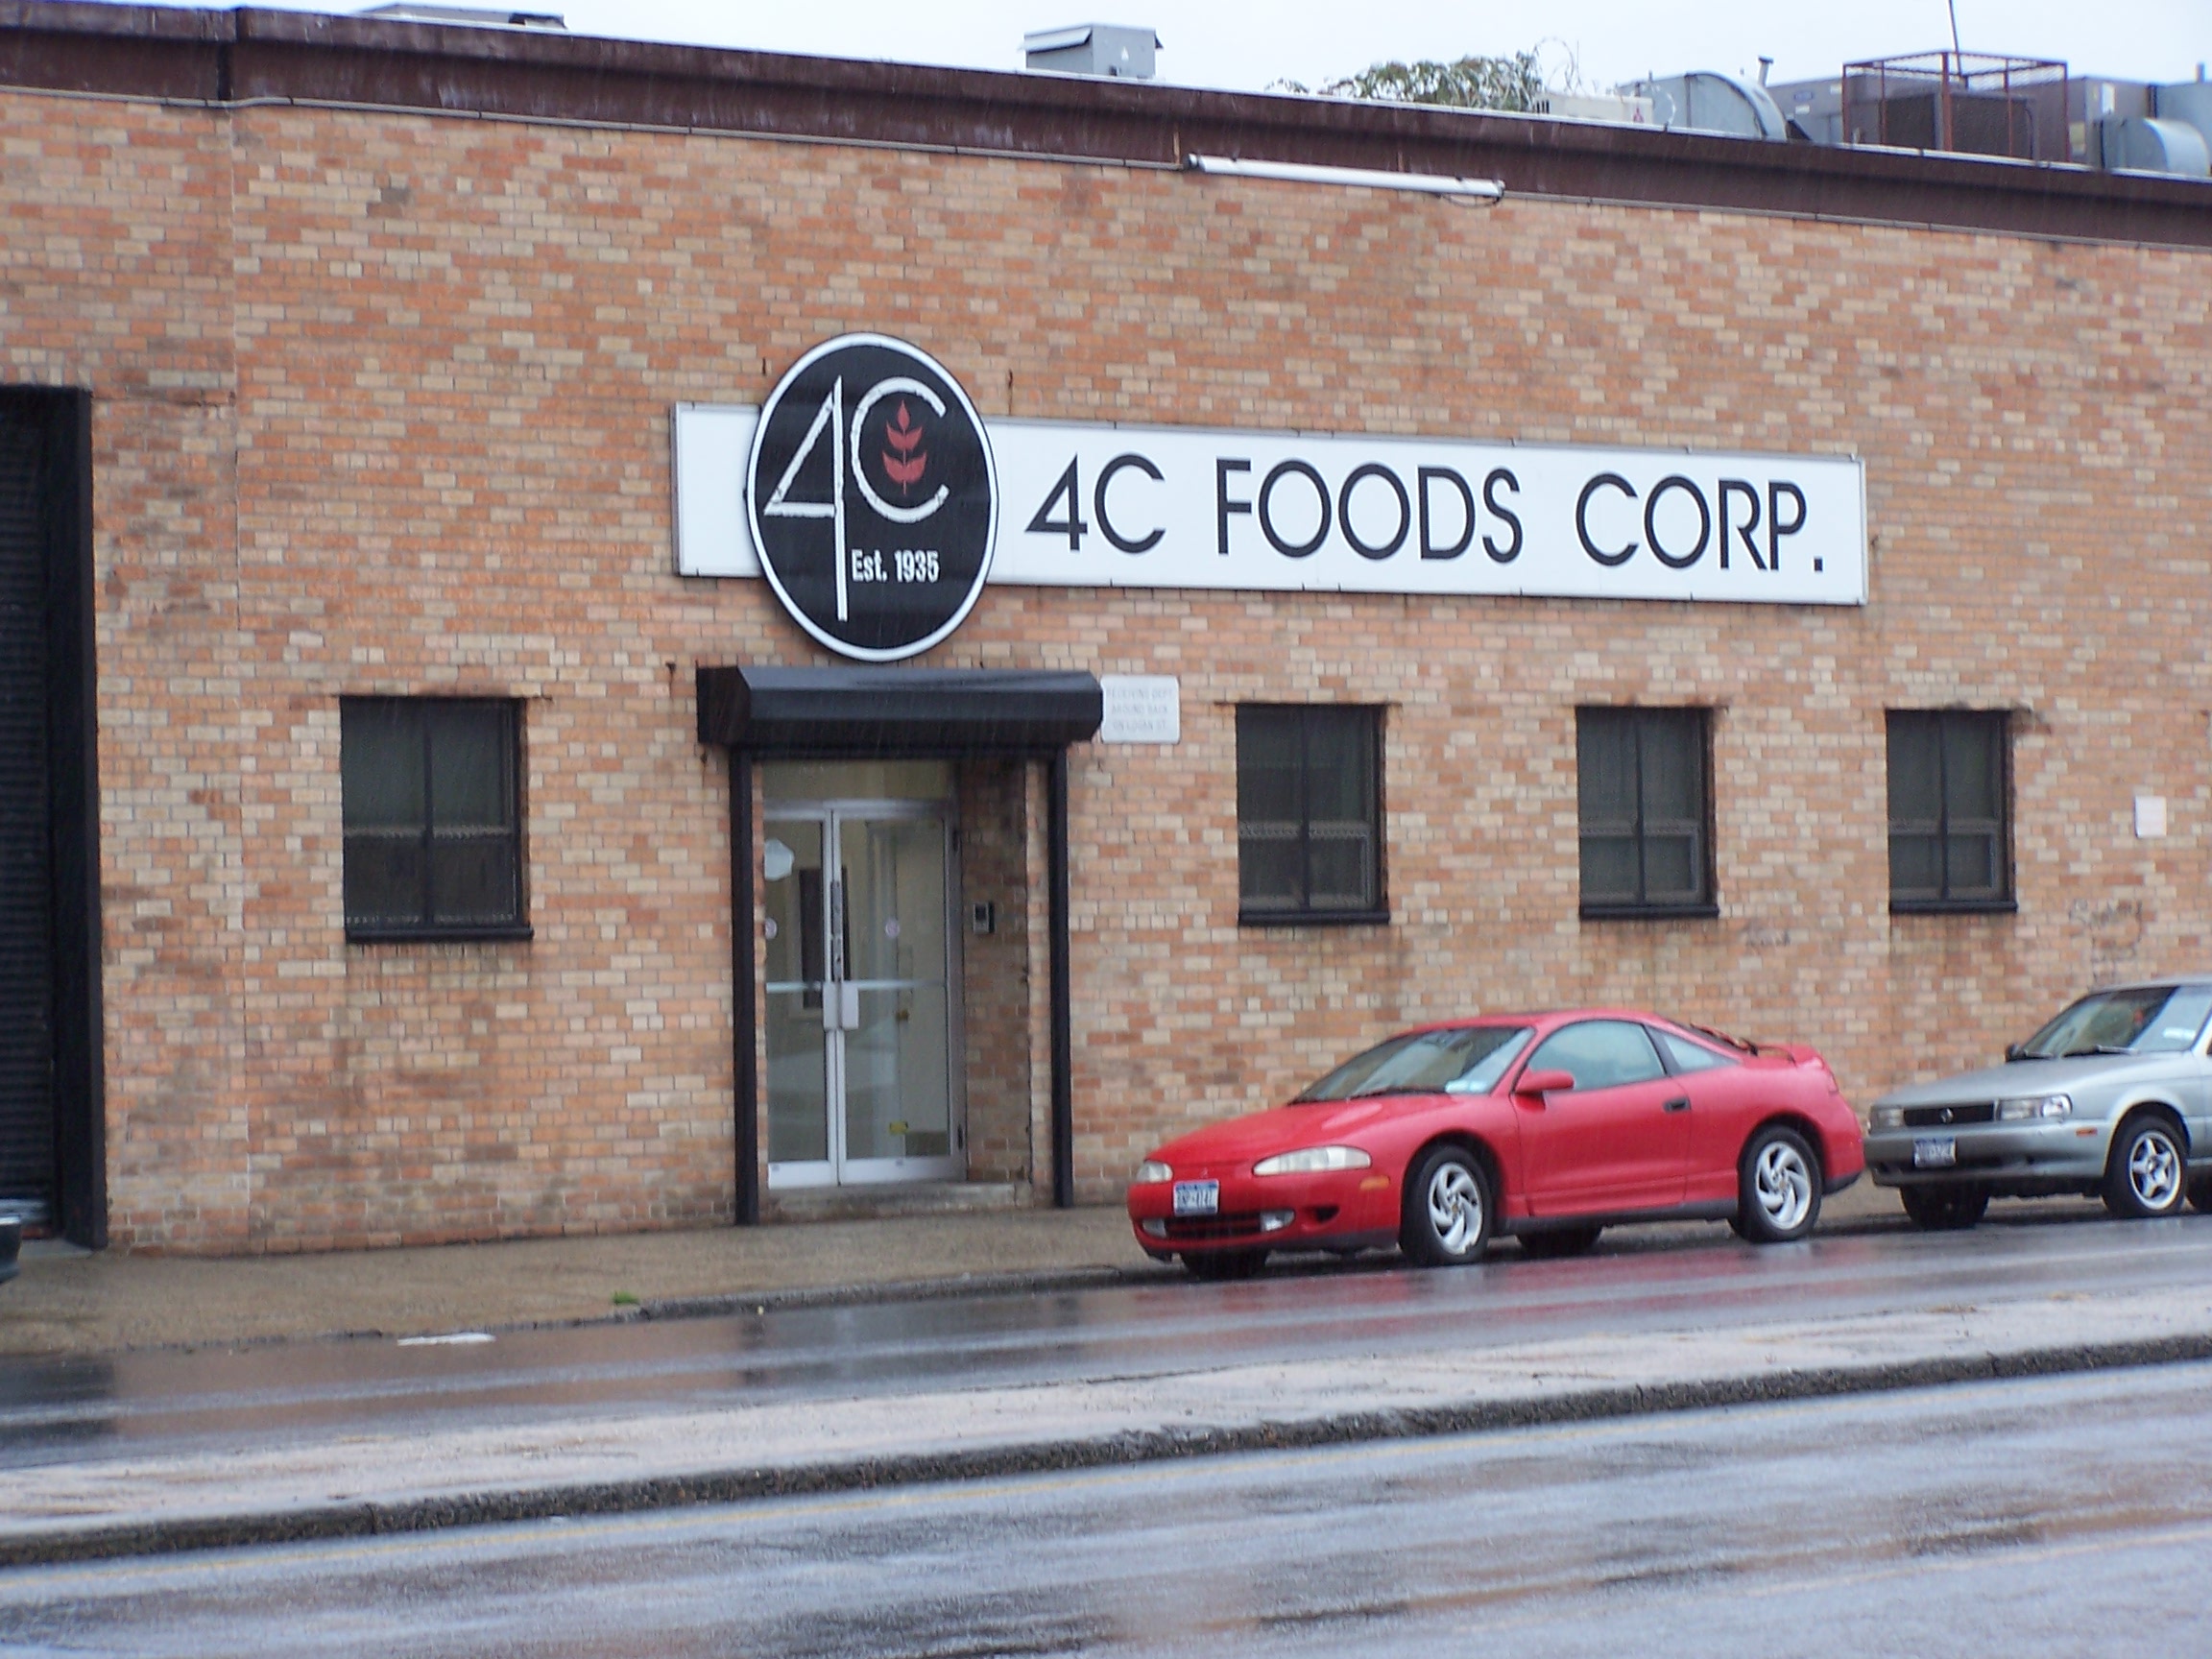 4C Foods uses waste heat to maximize the efficiency of its electric generating plant.